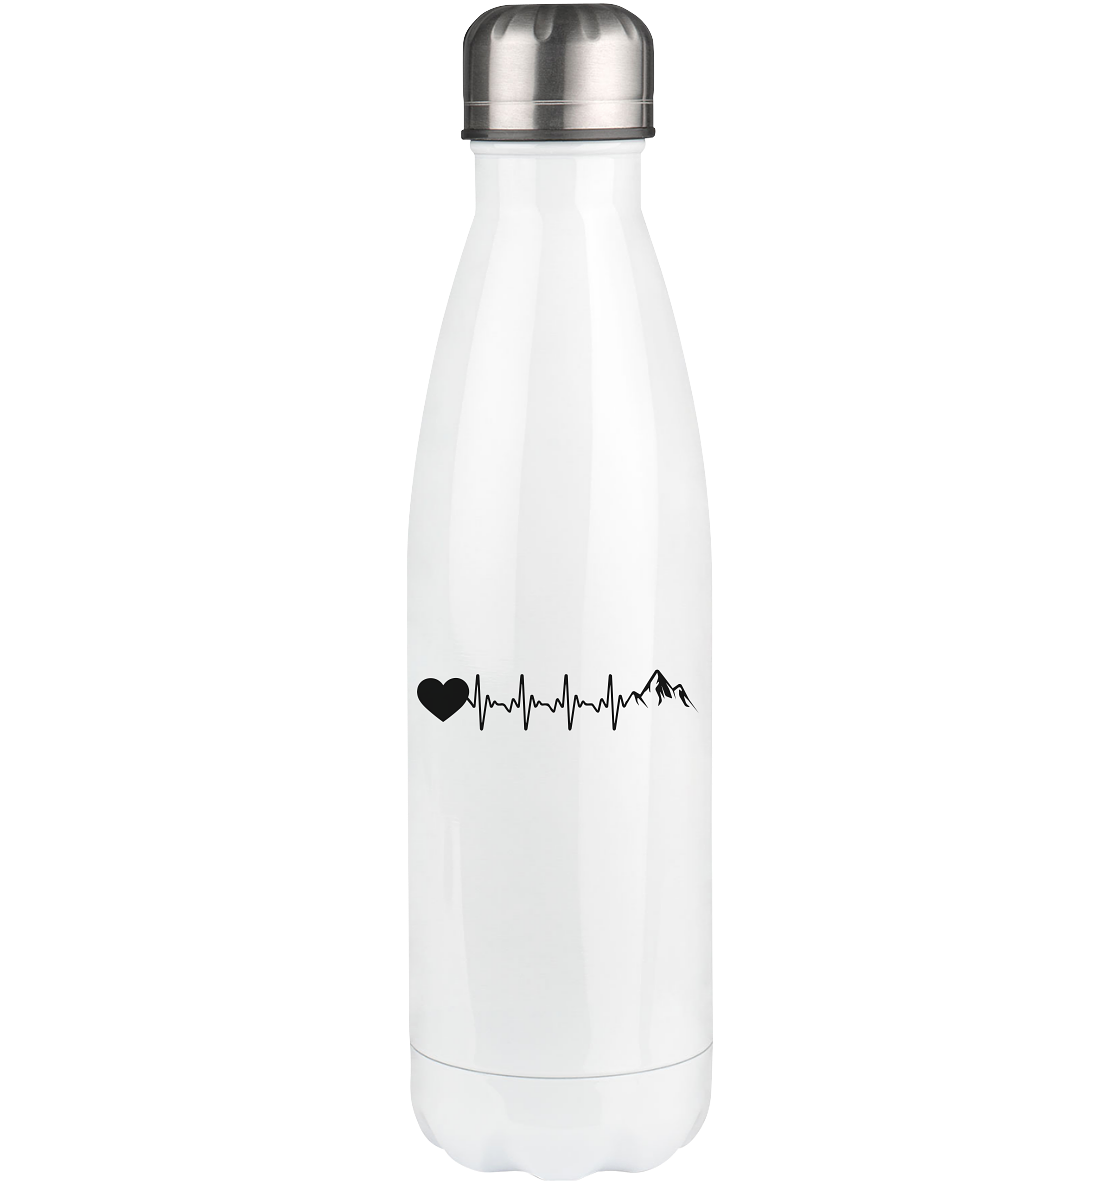 Heartbeat Heart and Mountain - Edelstahl Thermosflasche berge 500ml